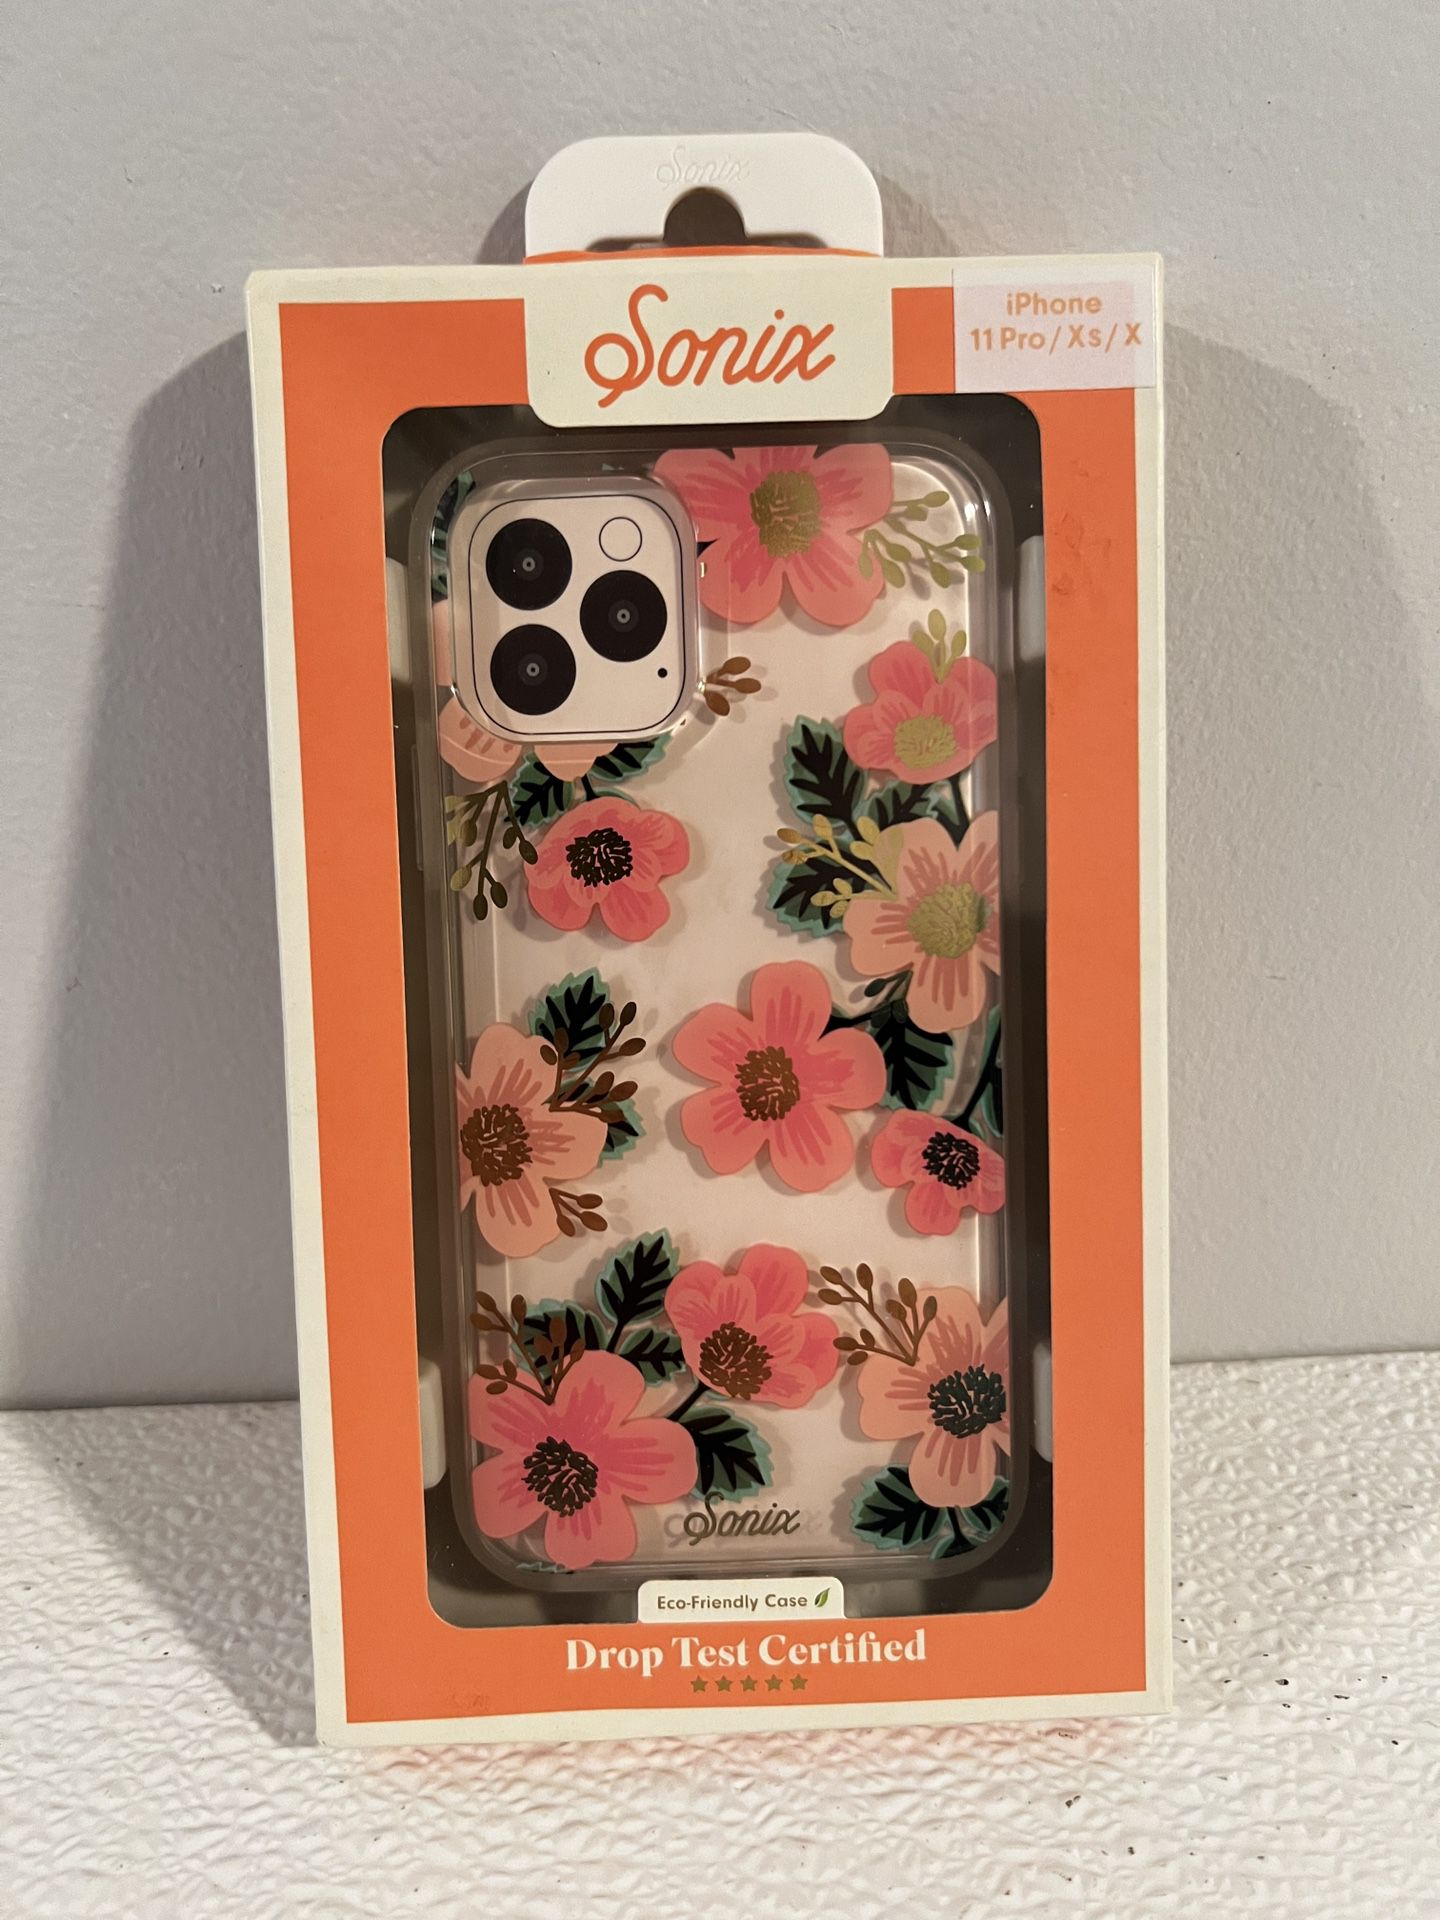 Sonix Southern Floral Case for iPhone 11 Pro/X/XS Protective Pink Clear Flowers